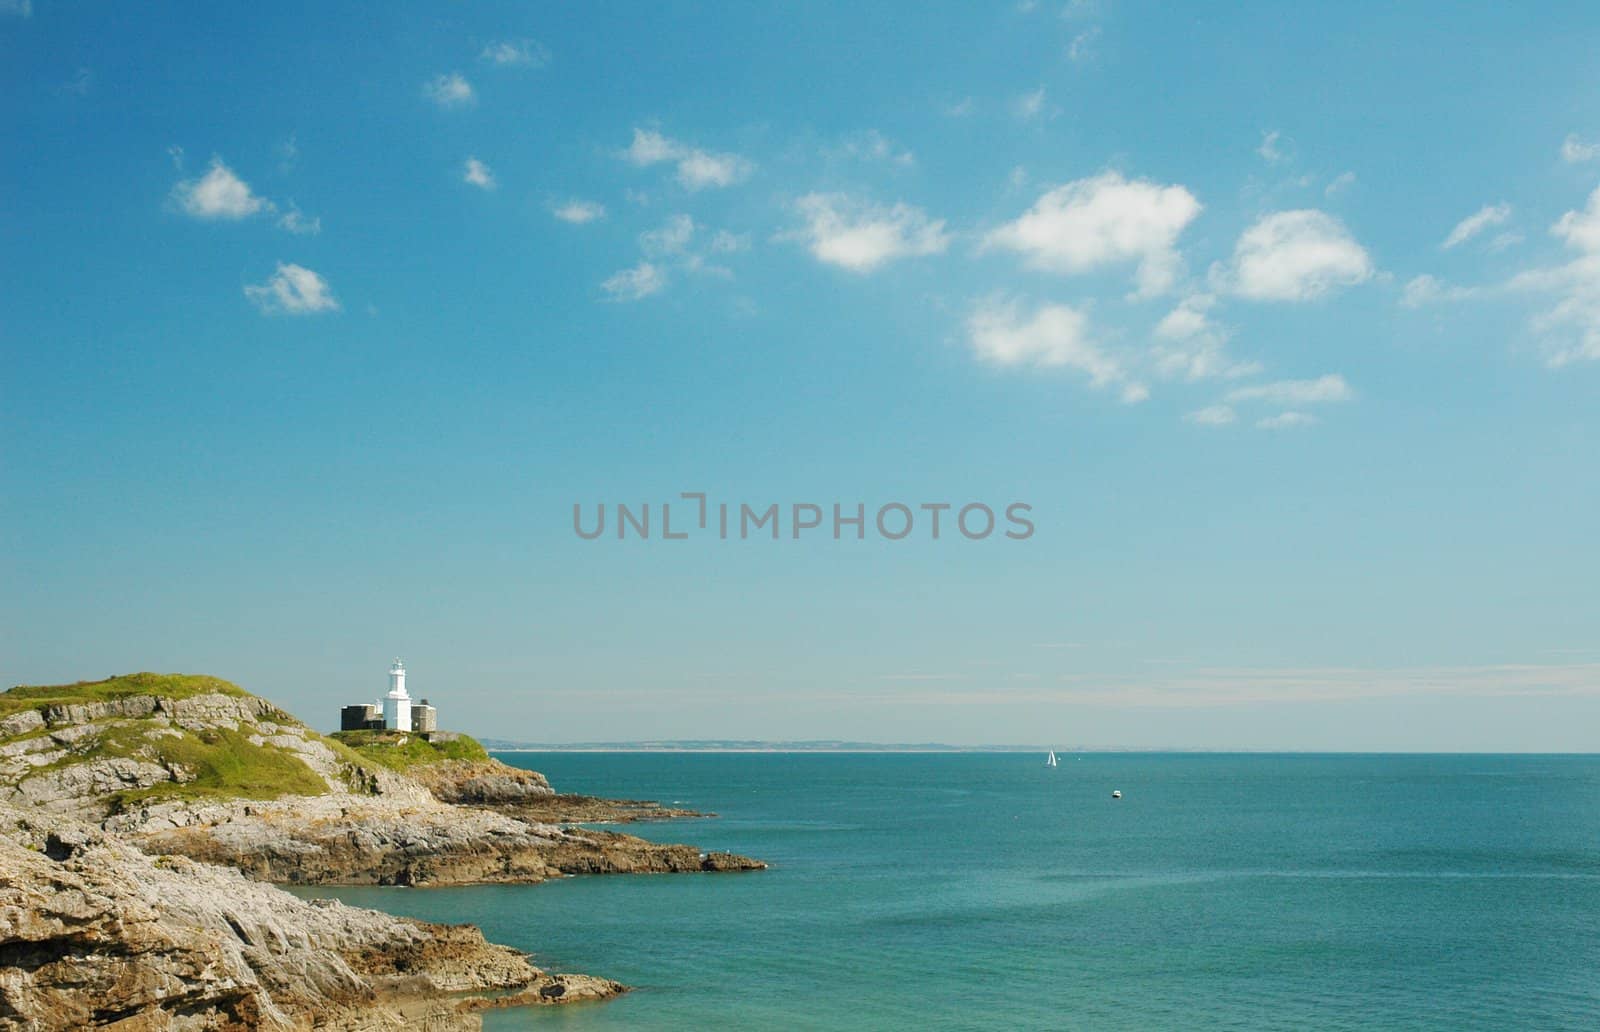 swansea and lighthouse by lehnerda